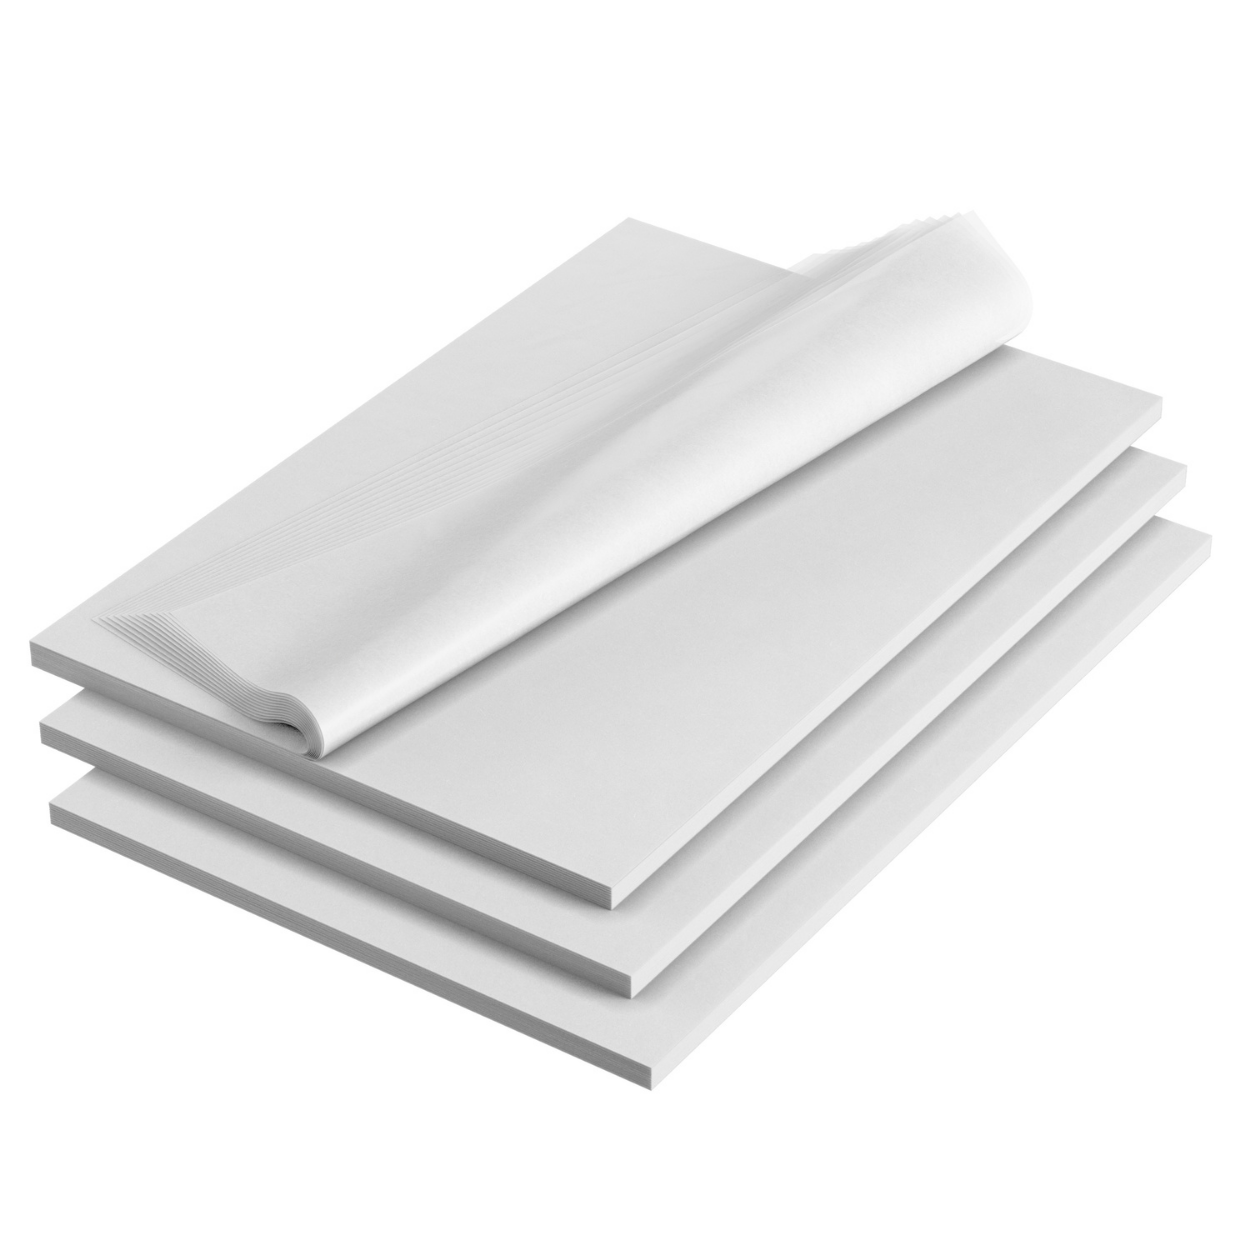 White One-Sided SatinWrap Pearlesence Tissue Paper - 20 x 30 - 200 Sheets  per Package